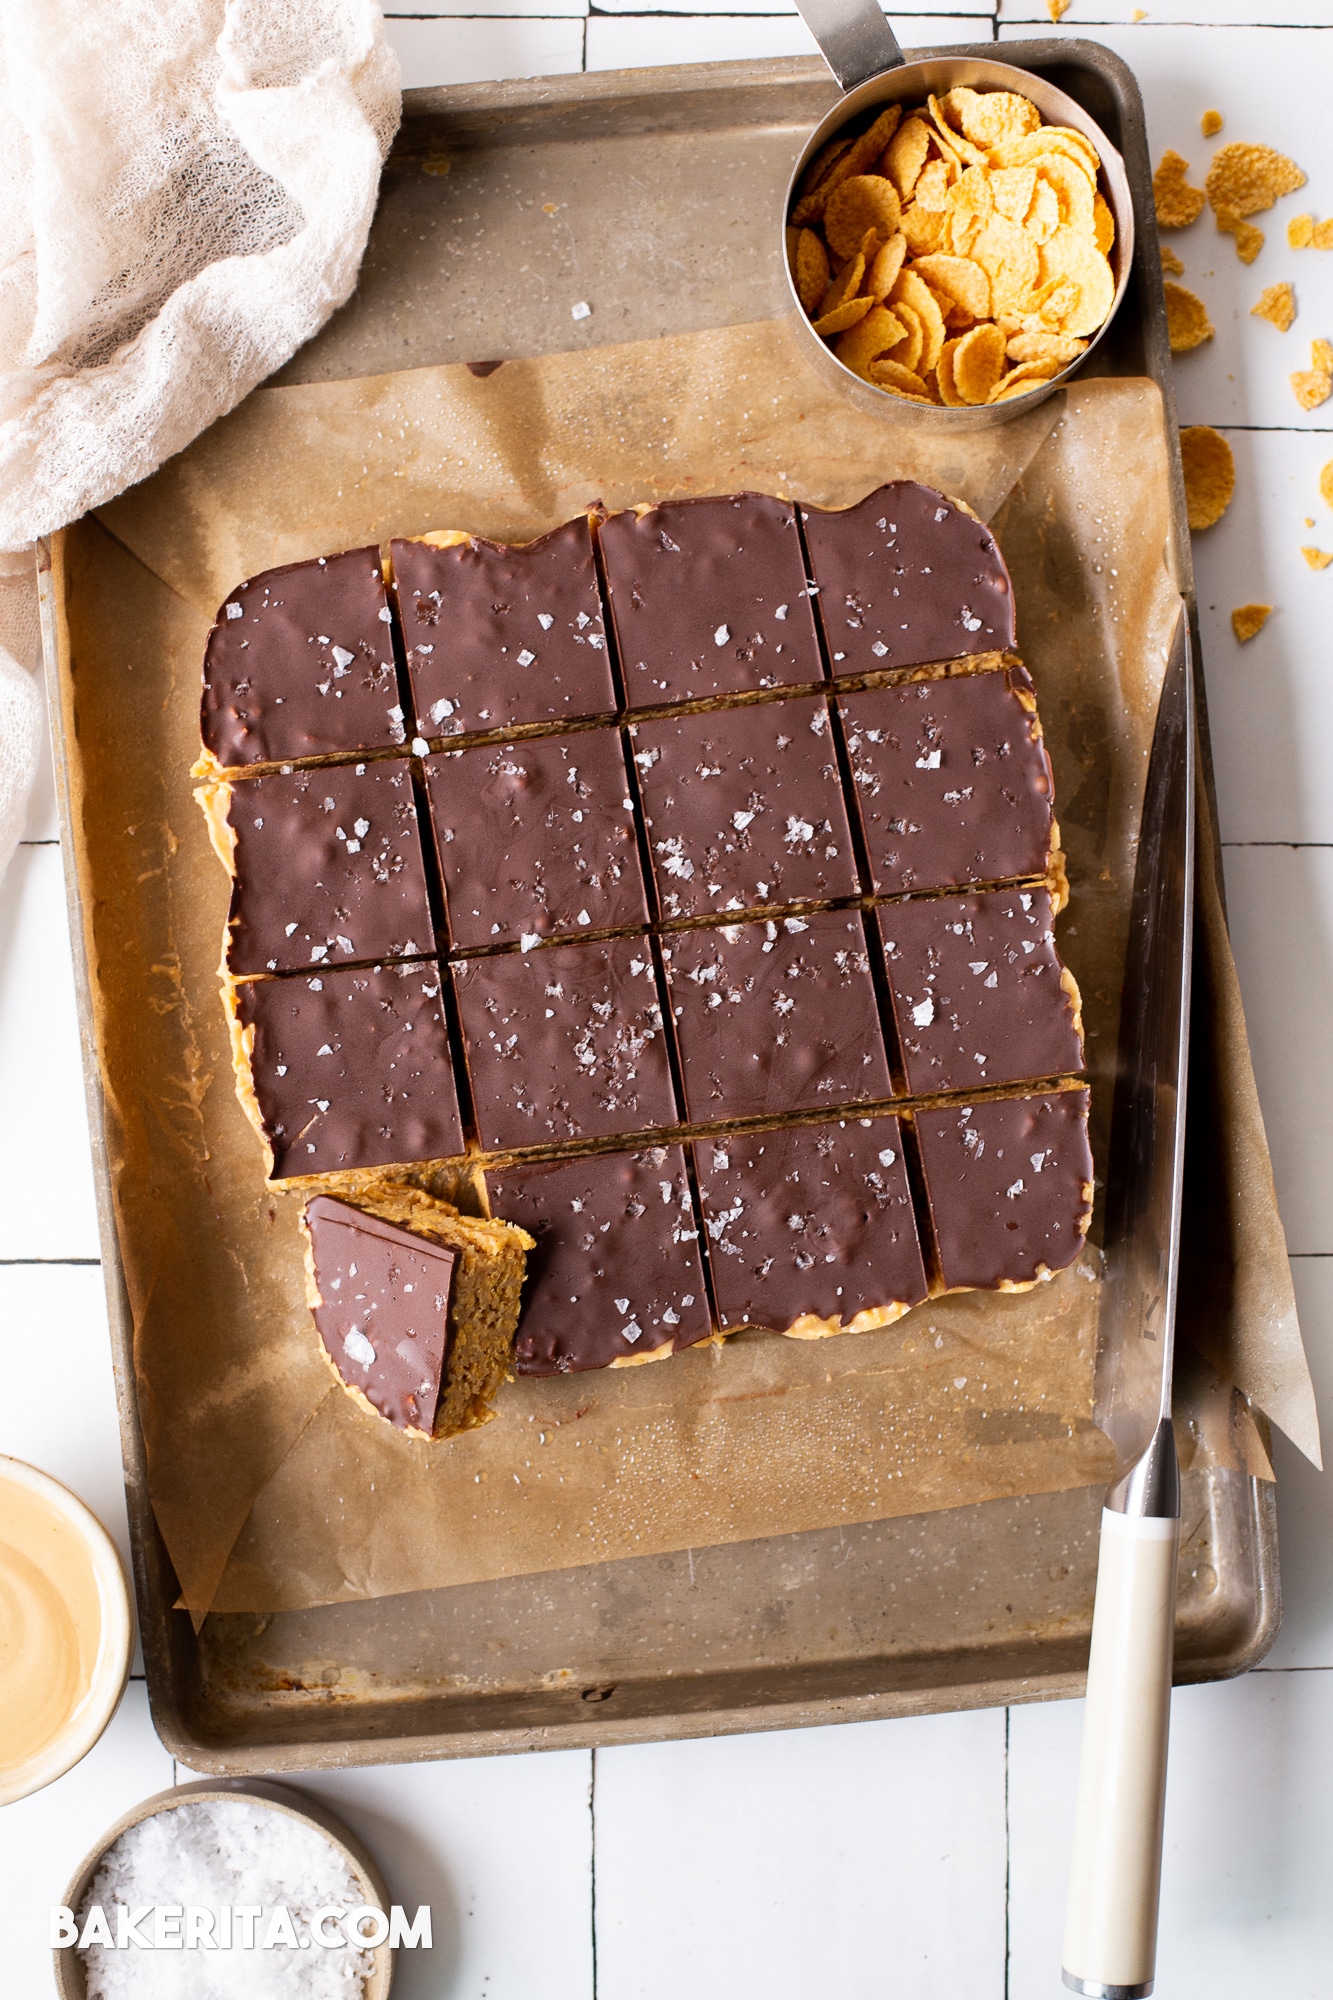 These Easy Peanut Butter Cornflakes Bars are naturally gluten-free, vegan, and absolutely irresistible. They're quick and simple to make, and can be made using your favorite nut or seed butter if you need a peanut-free or nut-free option. 